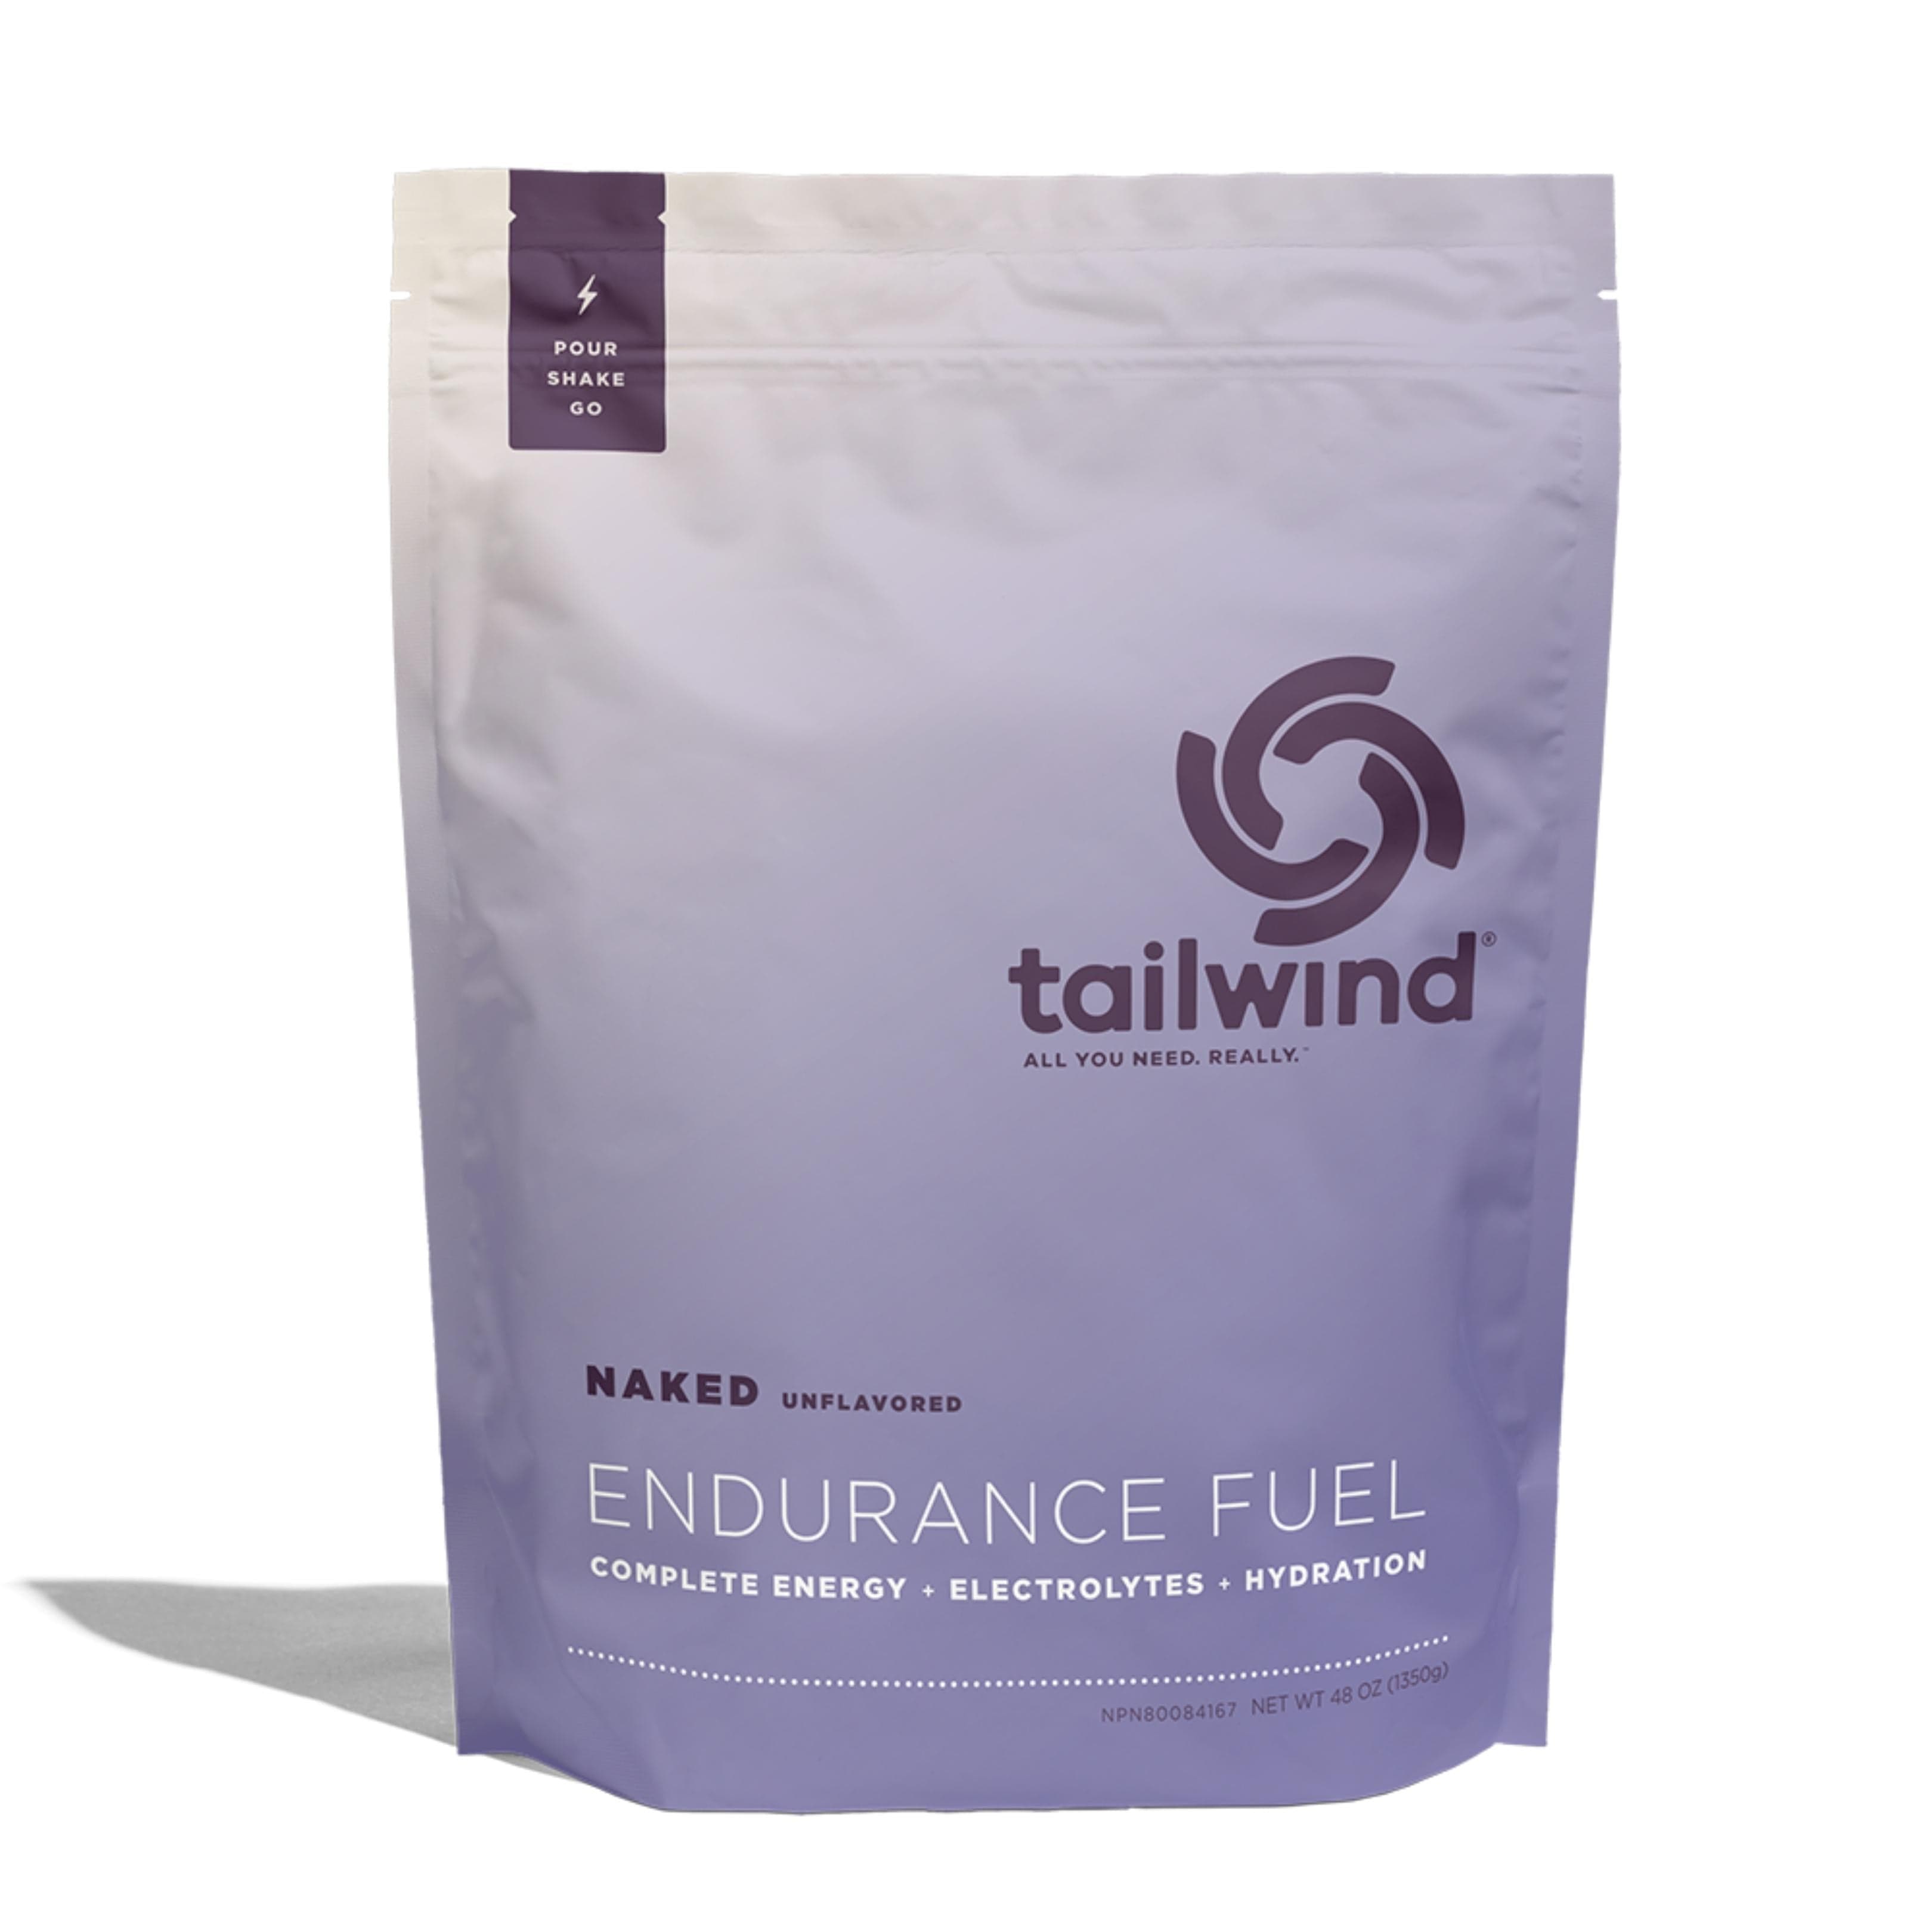 tailwind Nutrition Supplement Medium (30 servings) / Naked (Unflavoured) Endurance Fuel Drink Mix 8 55283 00508 8